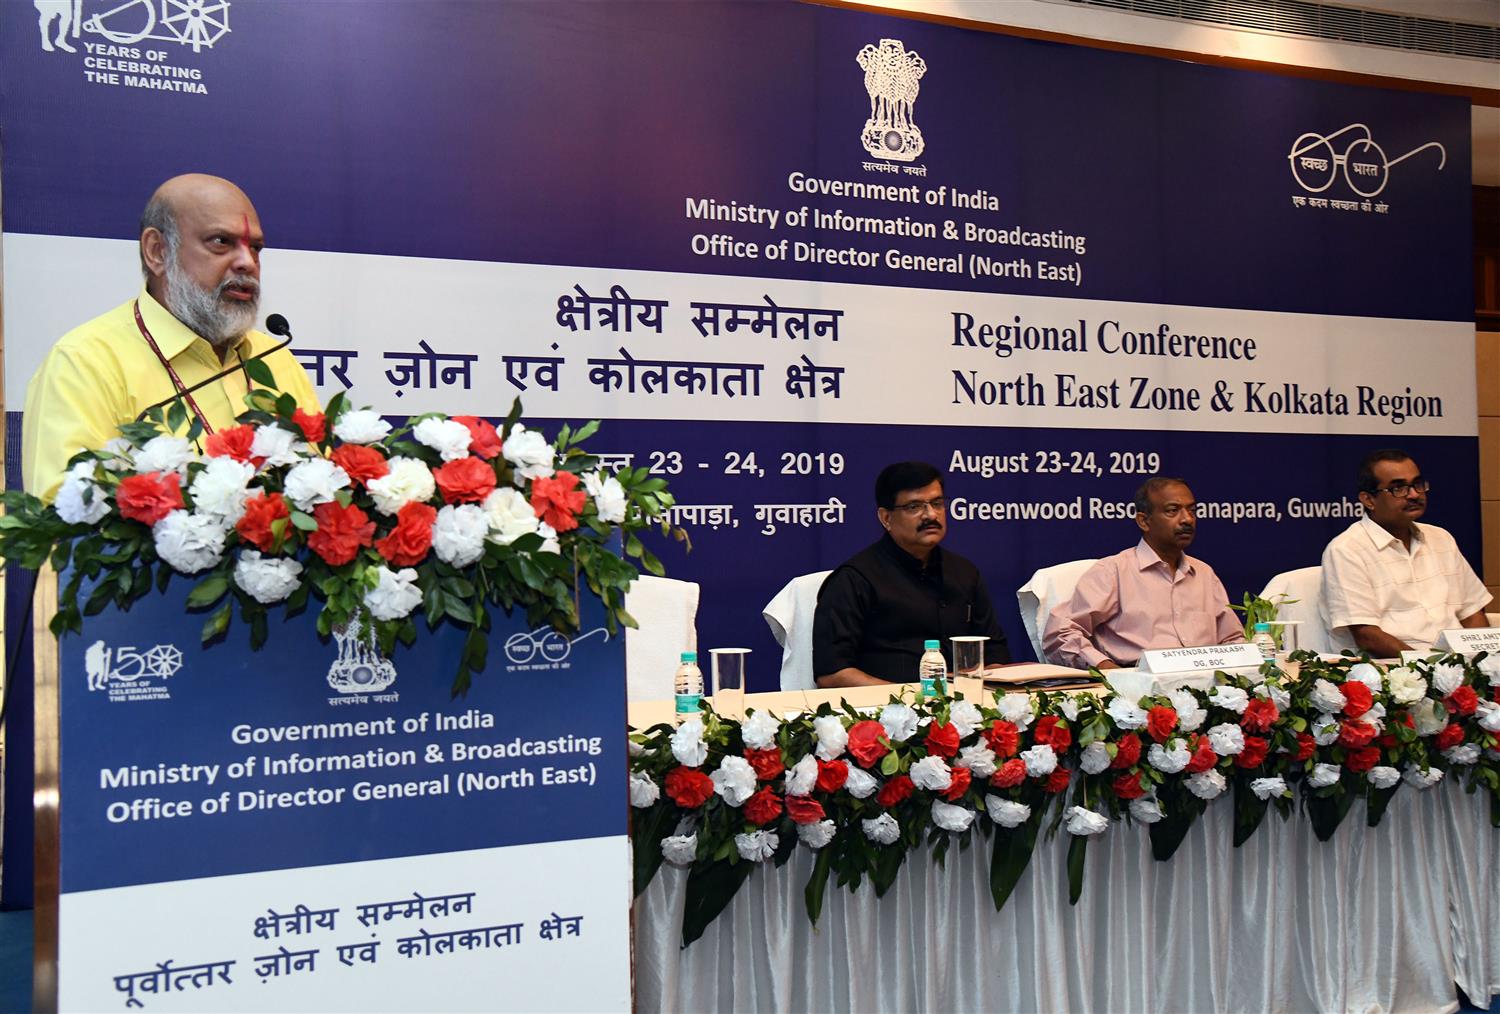 Shri. L.R Vishwanath, Director General North East Zone delivering his speech at the  Regional Conference of NE Zone &  Kolkata Region  at Guwahati  on 24th August 2019, Shri. Vikram Sahay Joint Secretary, Ministry of I& B ,Shri. Shri. Amit Khare, Secretary Ministry of I& B and Shri. Satyendra Prakash, Director General, BOC, New Delhi are also seen in the picture.